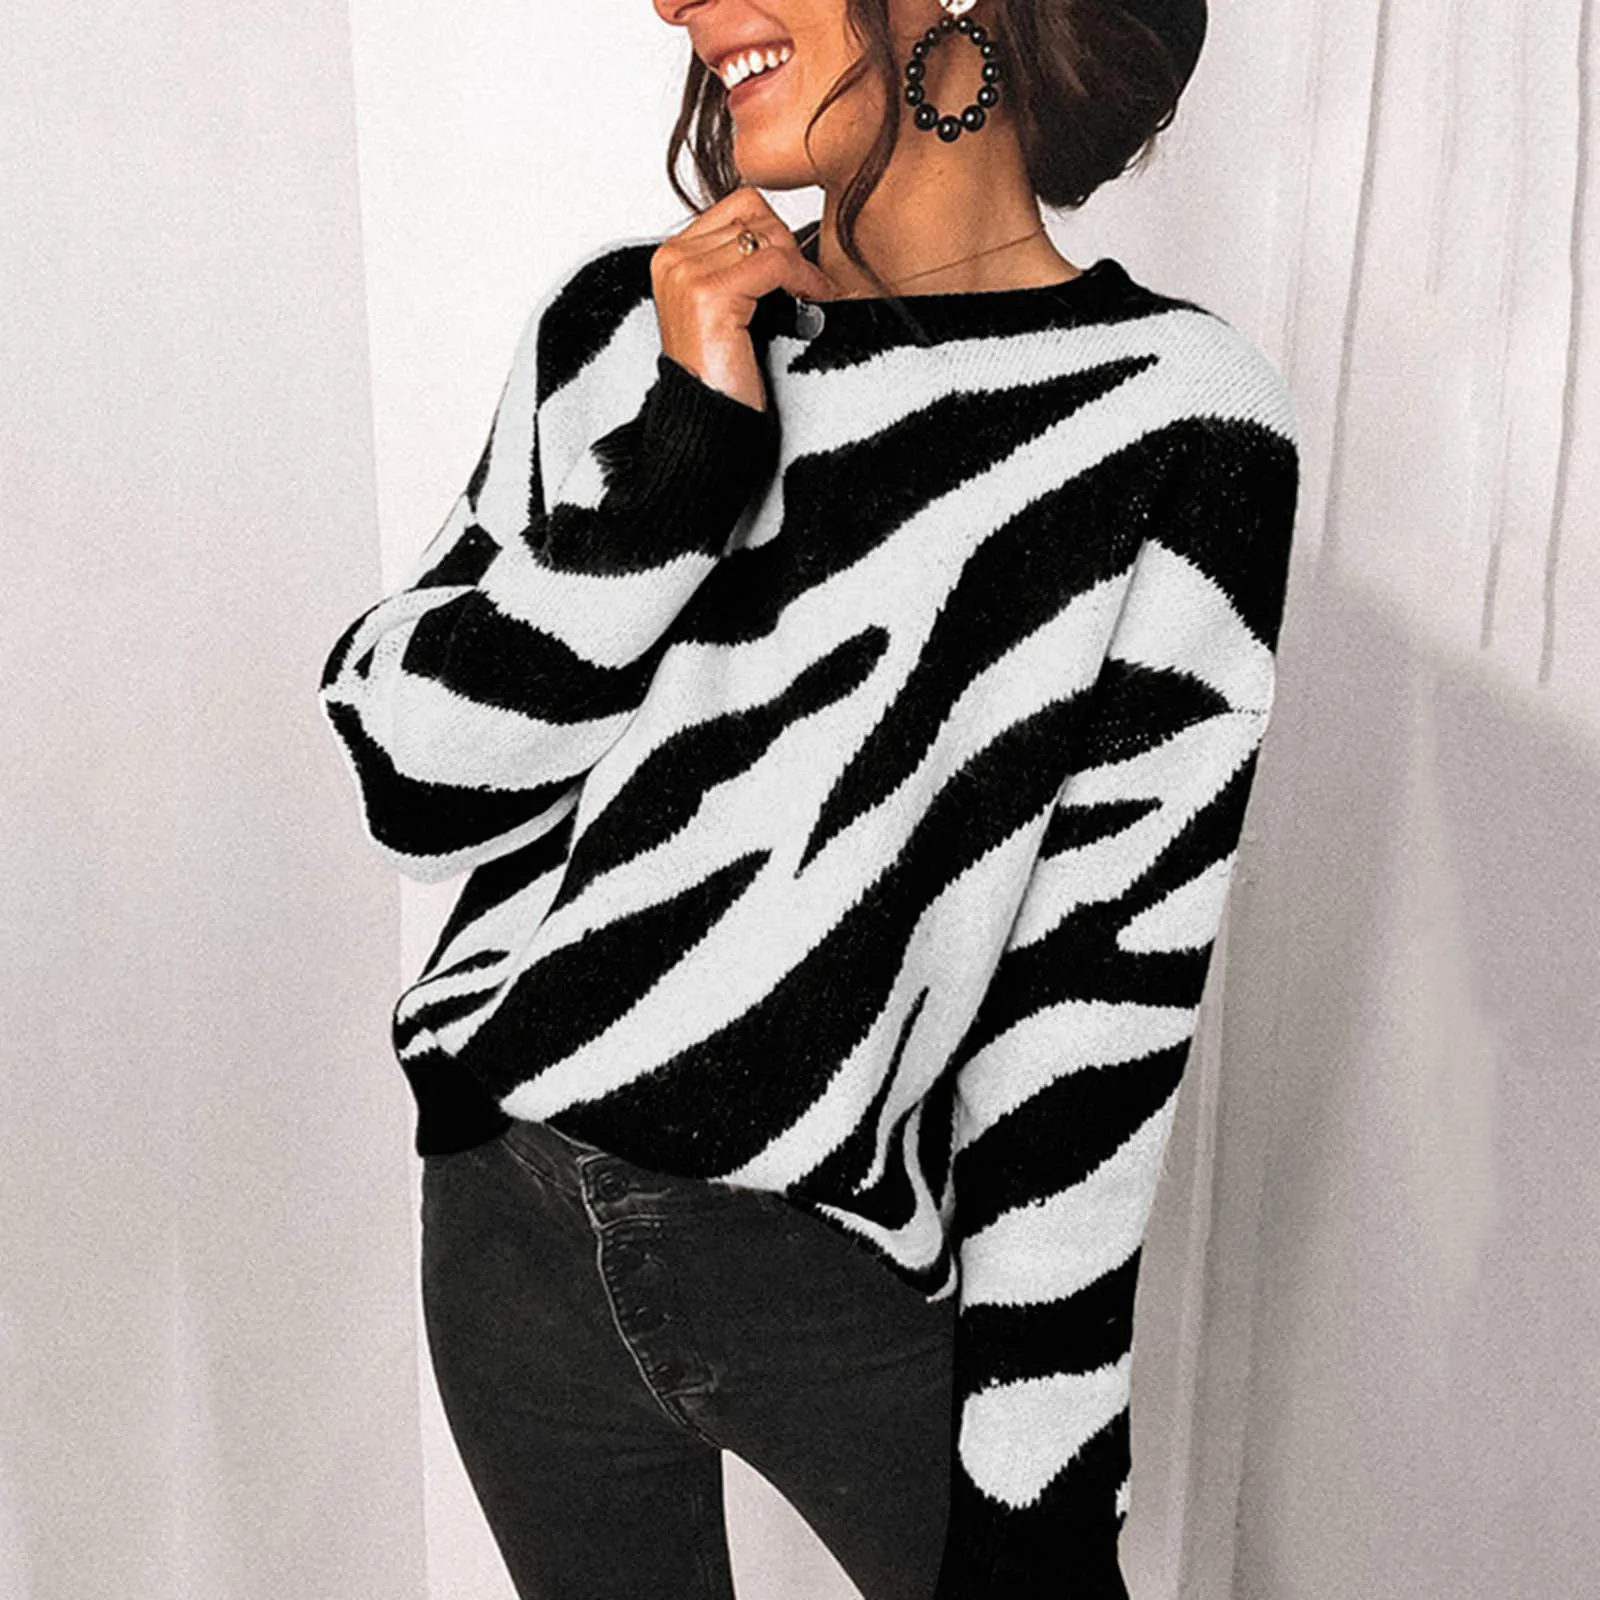 

Women's O Neck Loose Knit Striped Splicing Pullover Sweater Winter Clothes Women Жилетка Кофта Женская Кофта